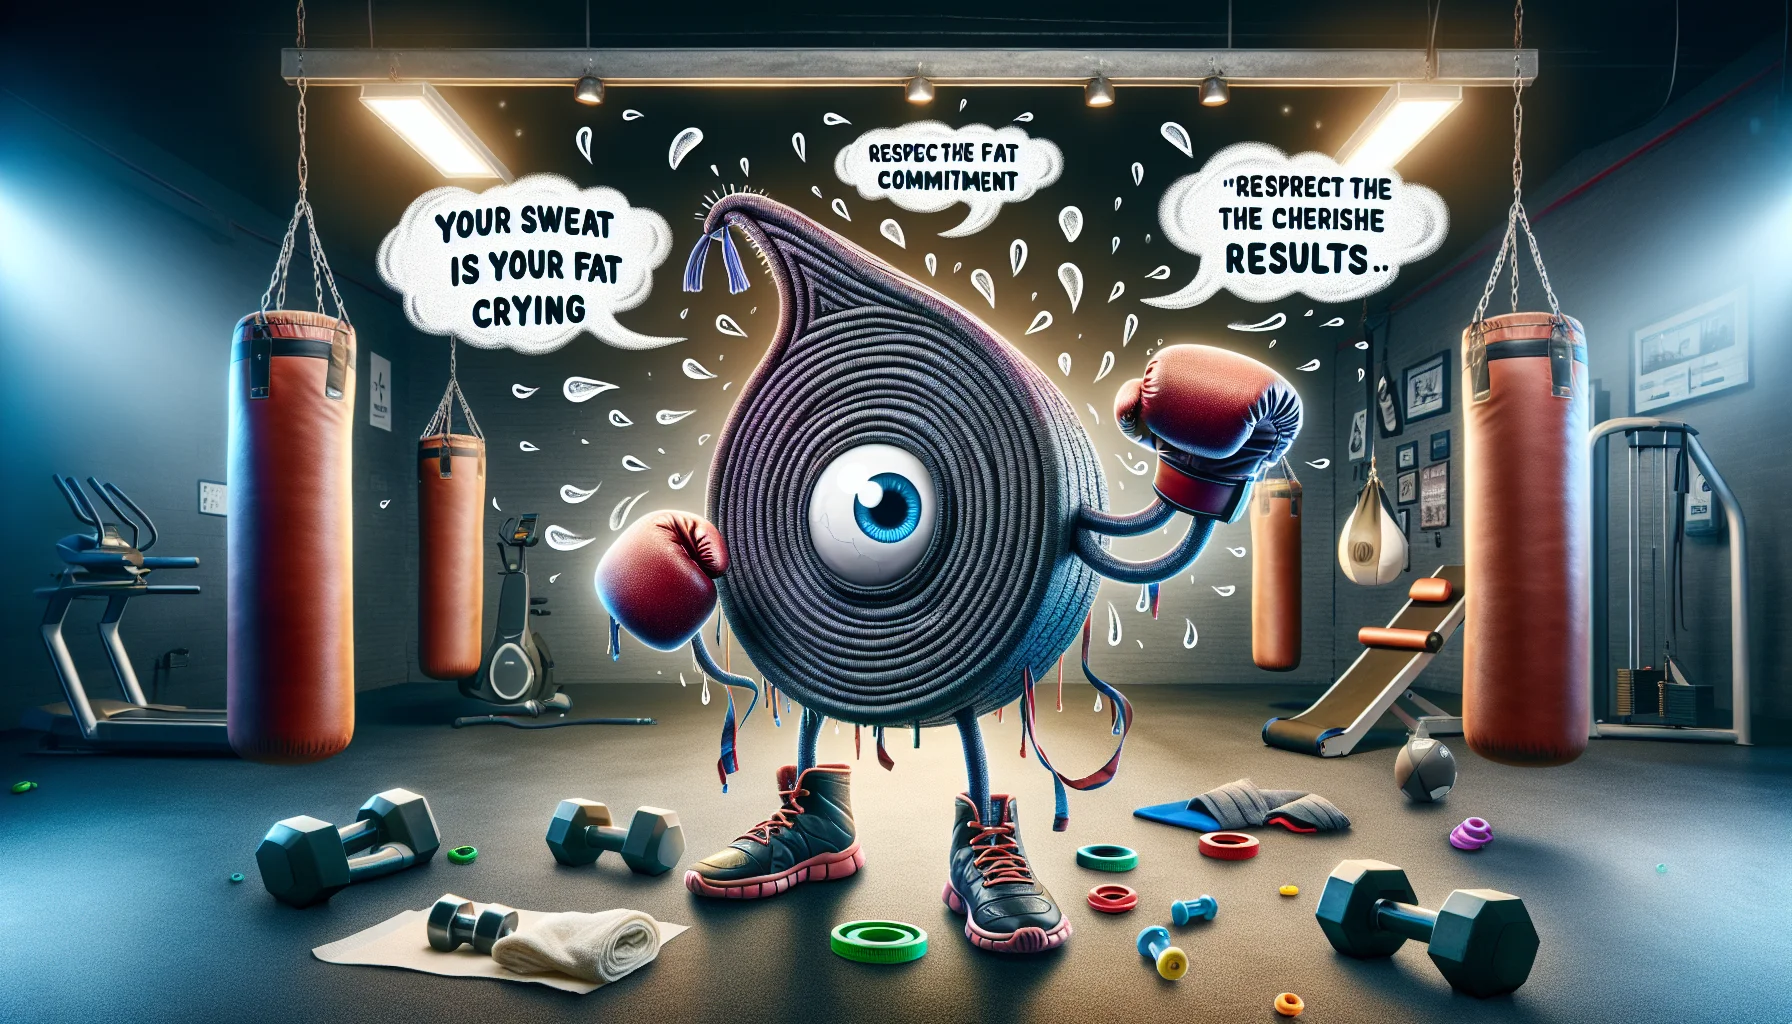 Create a humorous image that promotes physical activity and exercise, specifically focusing on kickboxing. The background should be a dynamically lit gym with an array of training equipment like punching bags, exercise mats and weights strewn about. In the forefront, an anthropomorphic kickboxing gear - gloves, head guard, ankle wraps - humorously coming to life, throwing punches and kicks in thin air, having eyes and mouth. Around them, swirl word bubbles containing playful, inspirational kickboxing quotes like 'Your sweat is your fat crying' or 'Respect the training, honor the commitment, cherish the results'.